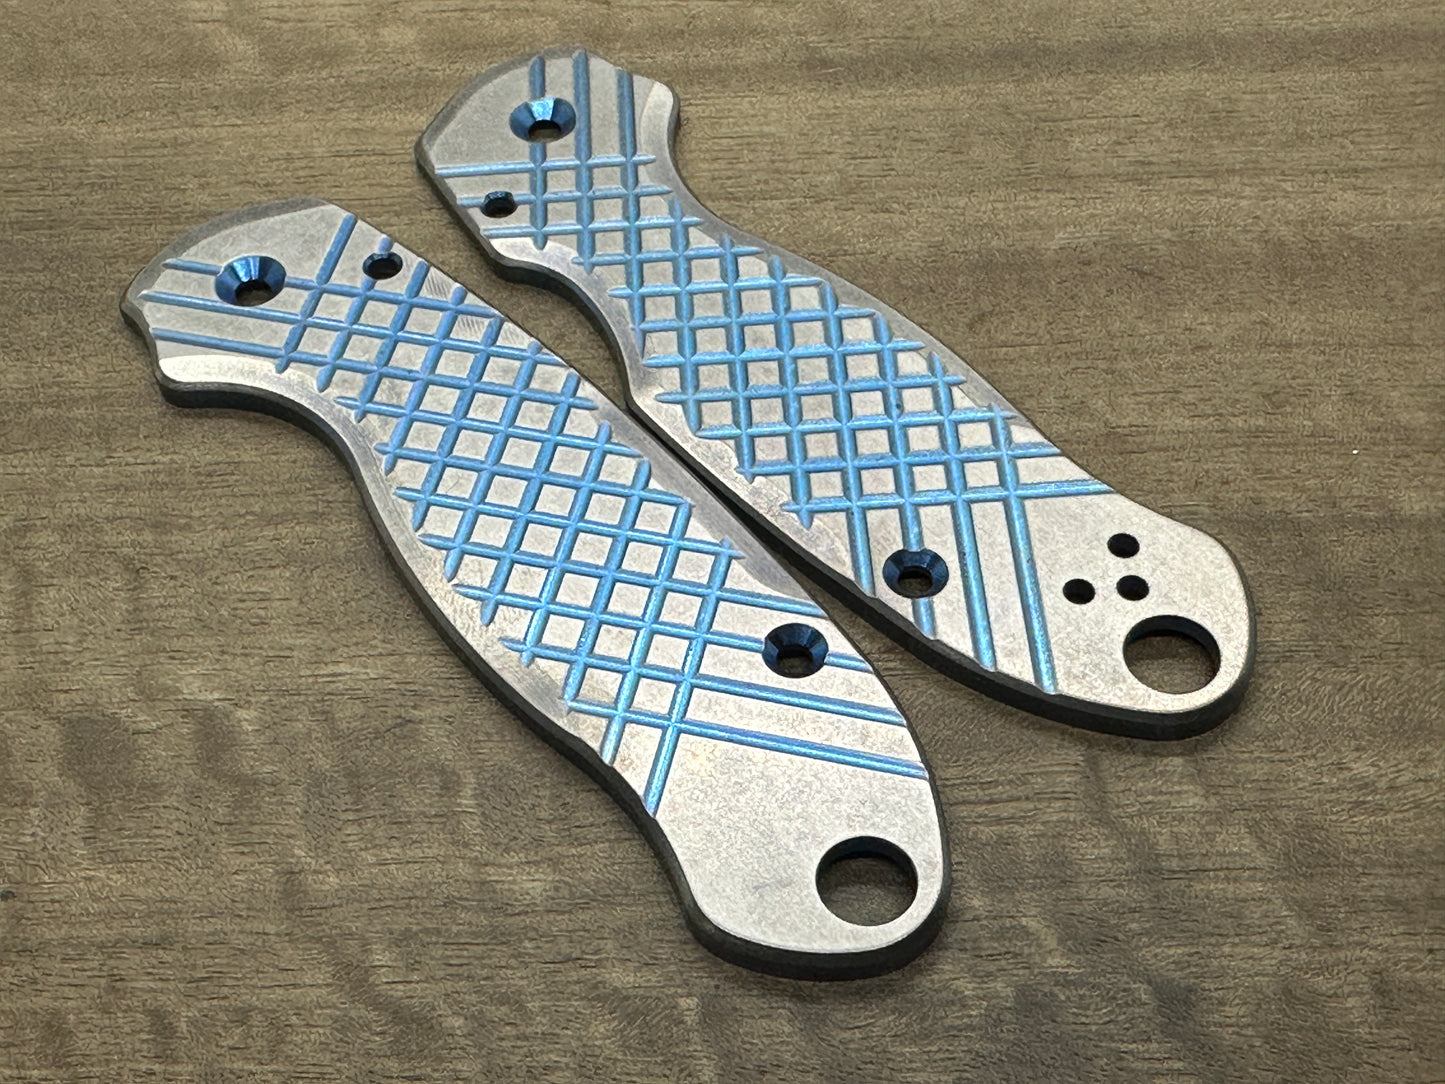 2-Tone BLUE ano & Brushed, Tumbled FRAG Titanium scales for Spyderco Para 3